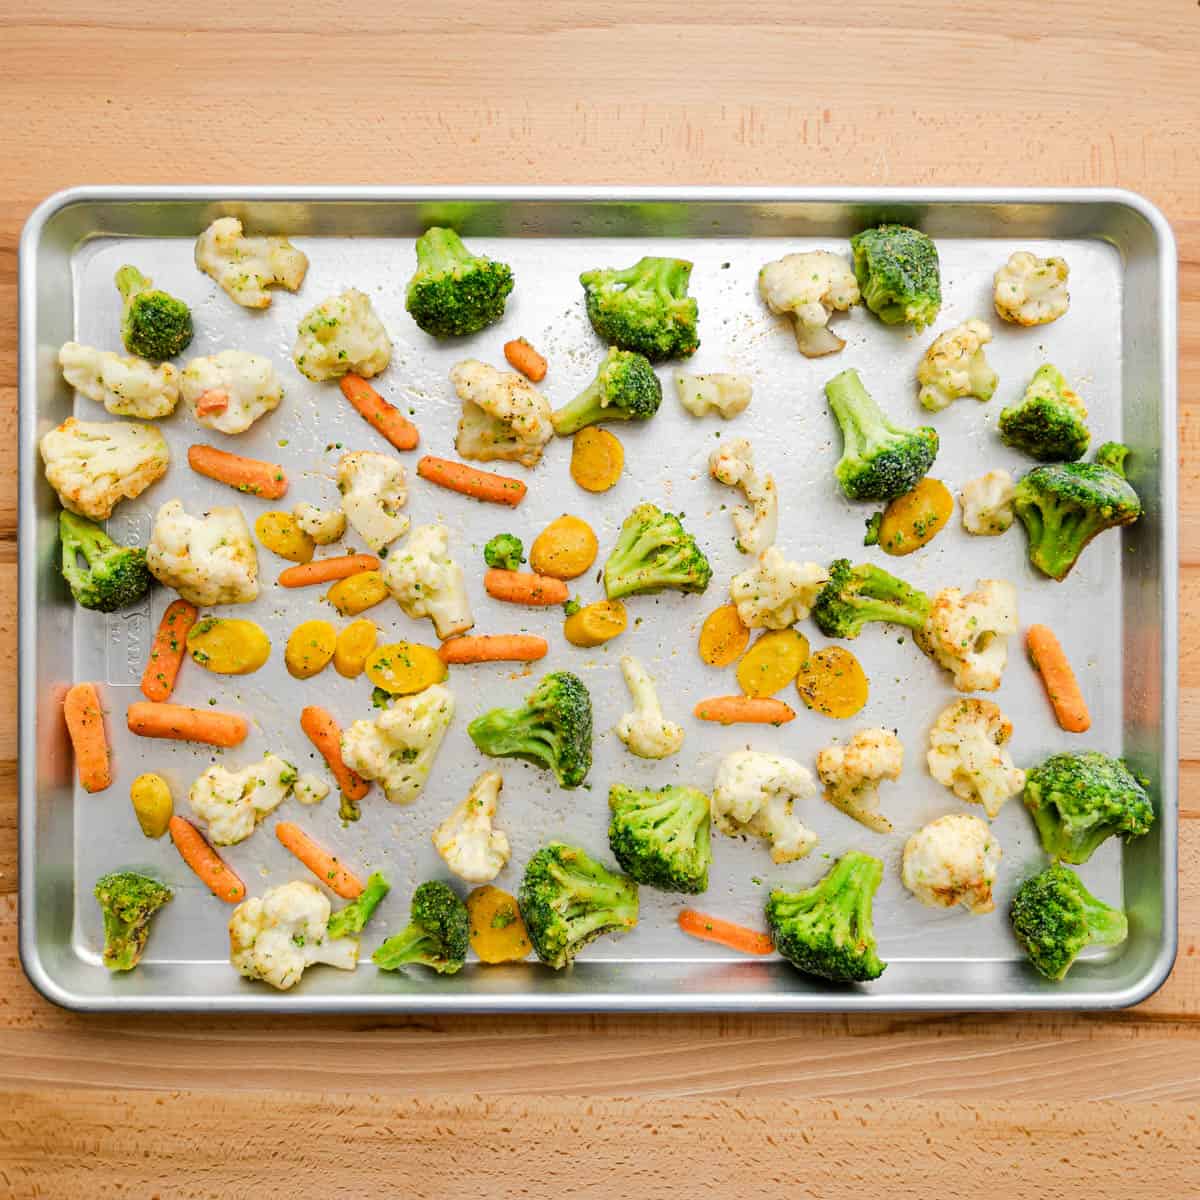 Remove the hot pan from the oven and carefully put the seasoned frozen vegetables onto the sheet pan, in a single layer. 